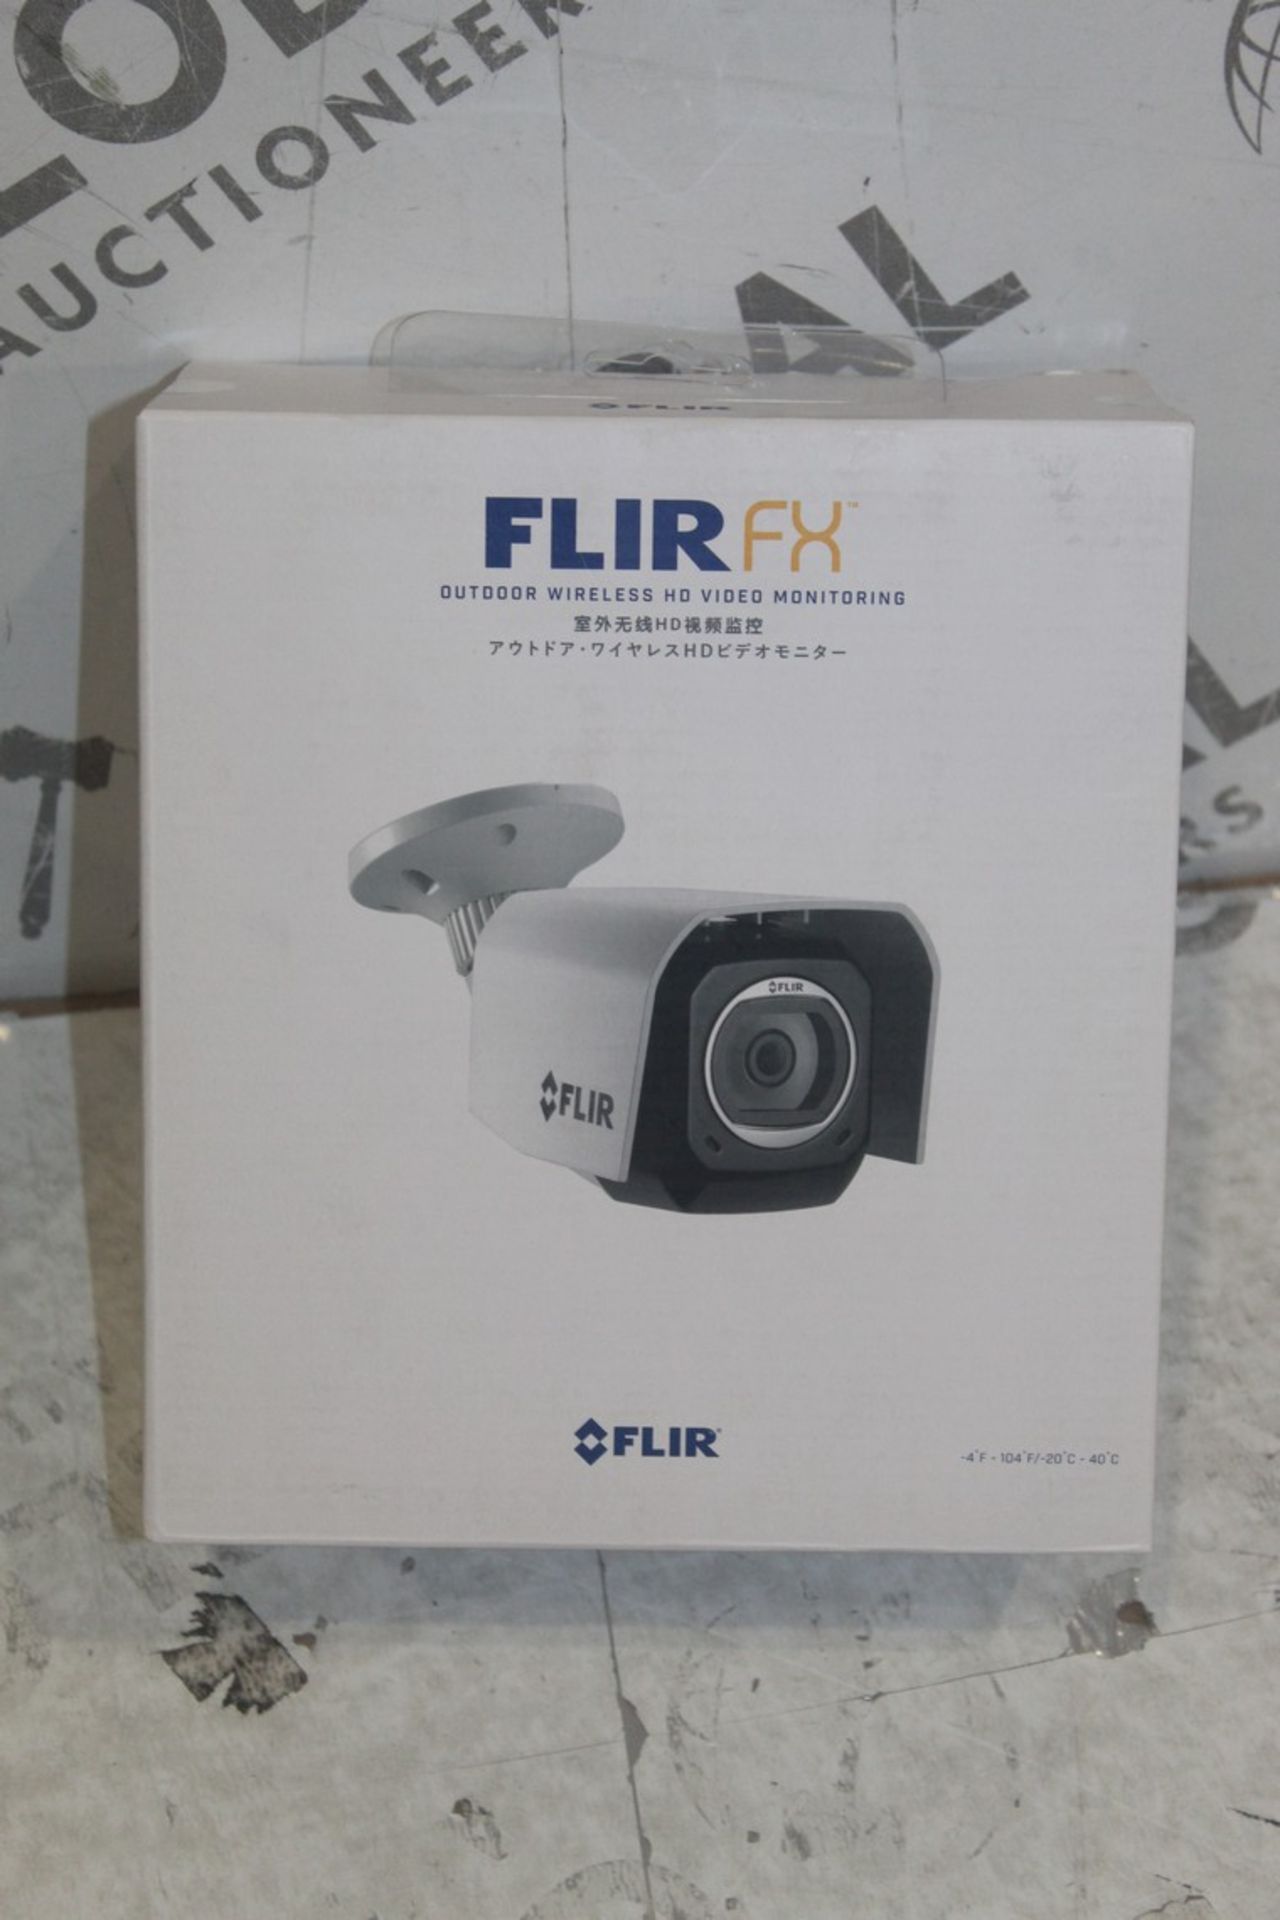 Boxed Flir FX Outdoor Wireless HD Video Monitoring CCTV Cameral RRP £300 (Pictures Are For